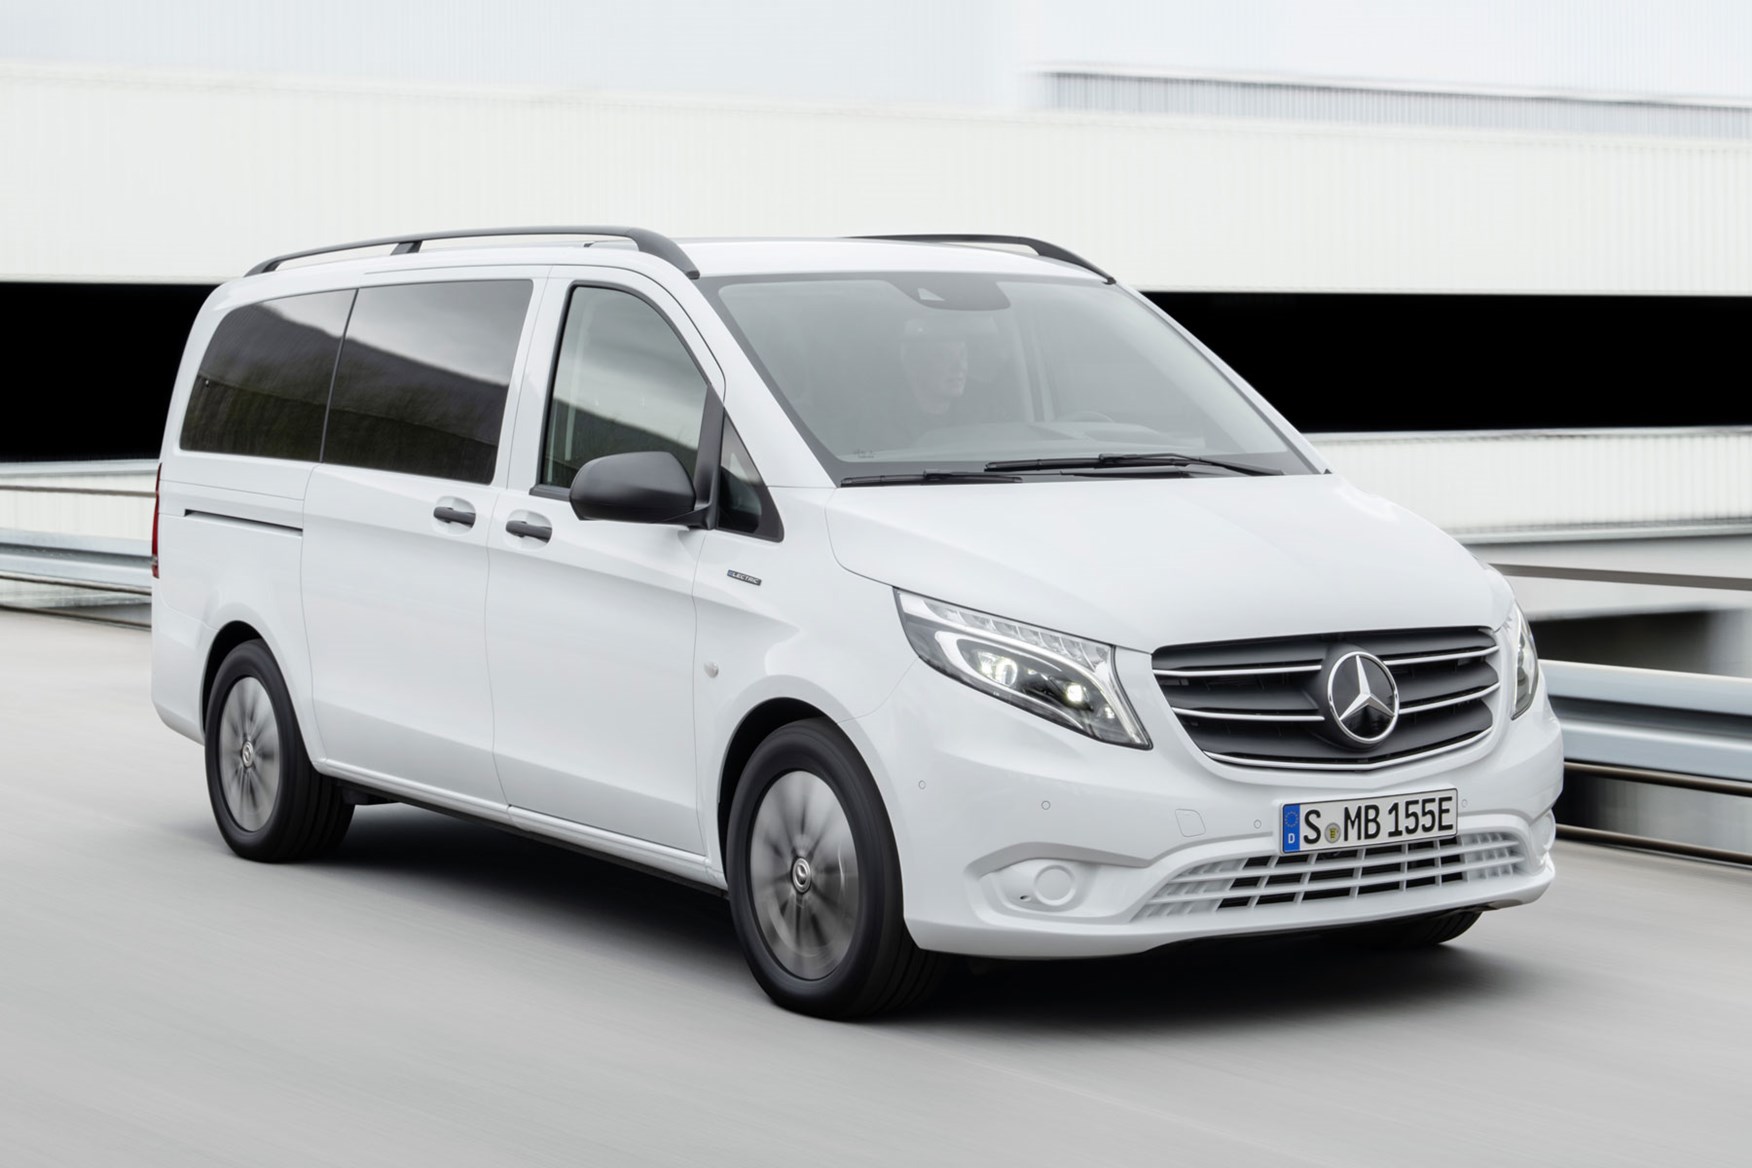 MercedesBenz Vito 2020 facelift UK pricing and spec, new